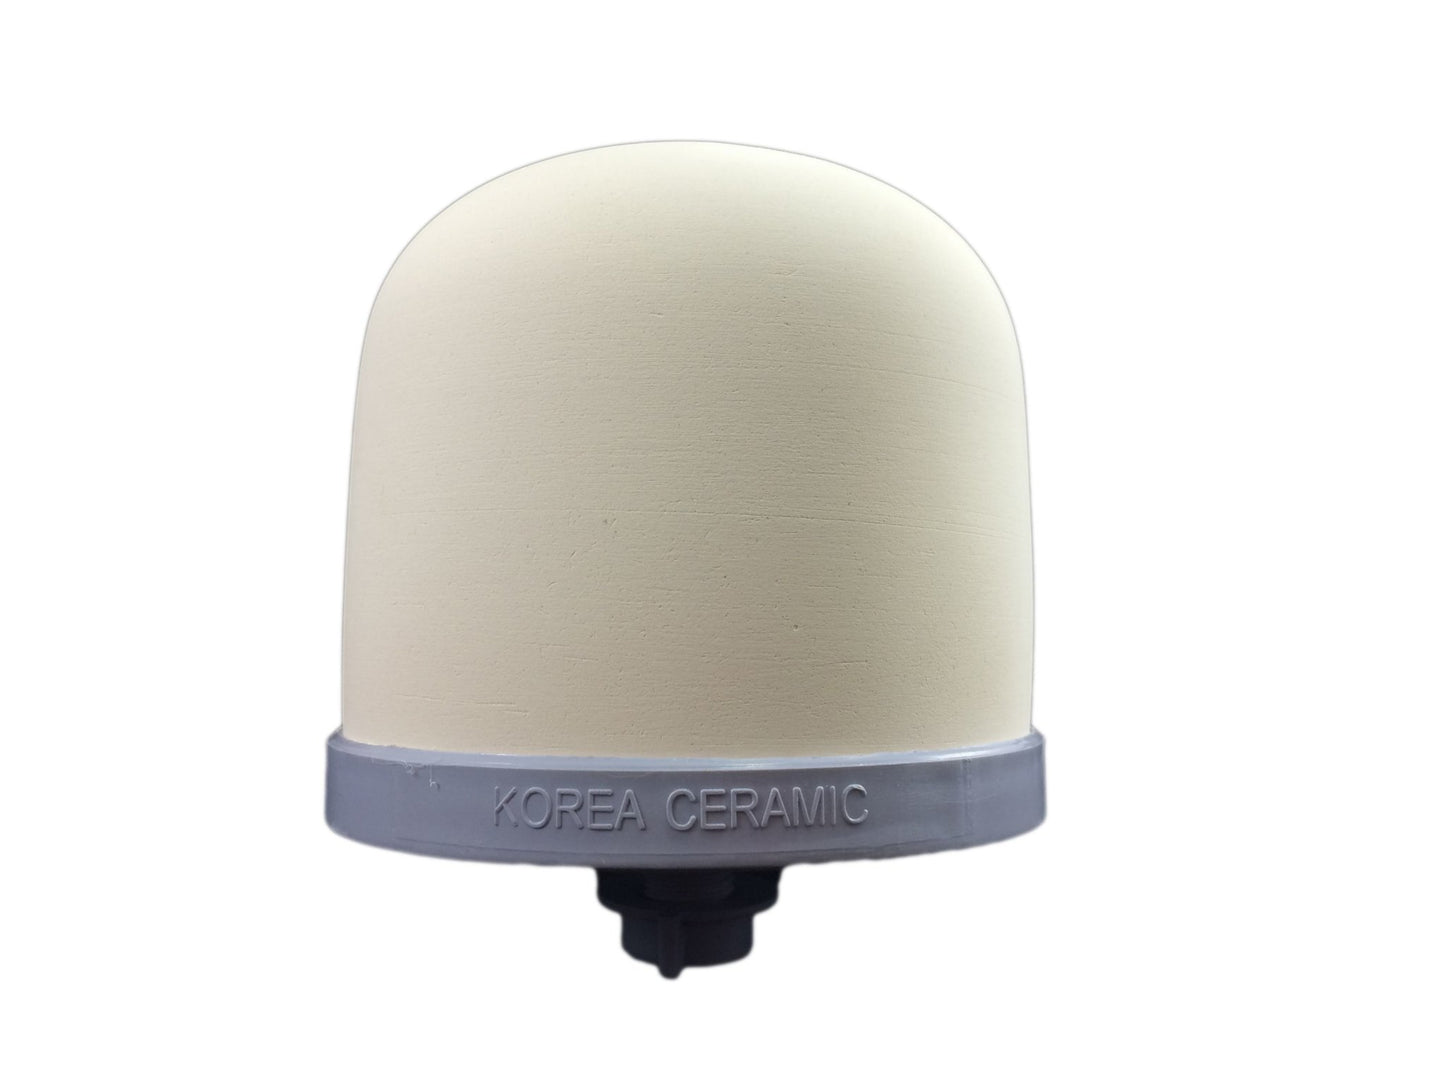 Ceramic Dome Filter | Suit 12L + 24L Benchtop Purifiers (GT1-13/14CERAMIC) - Water Filter Direct Australia